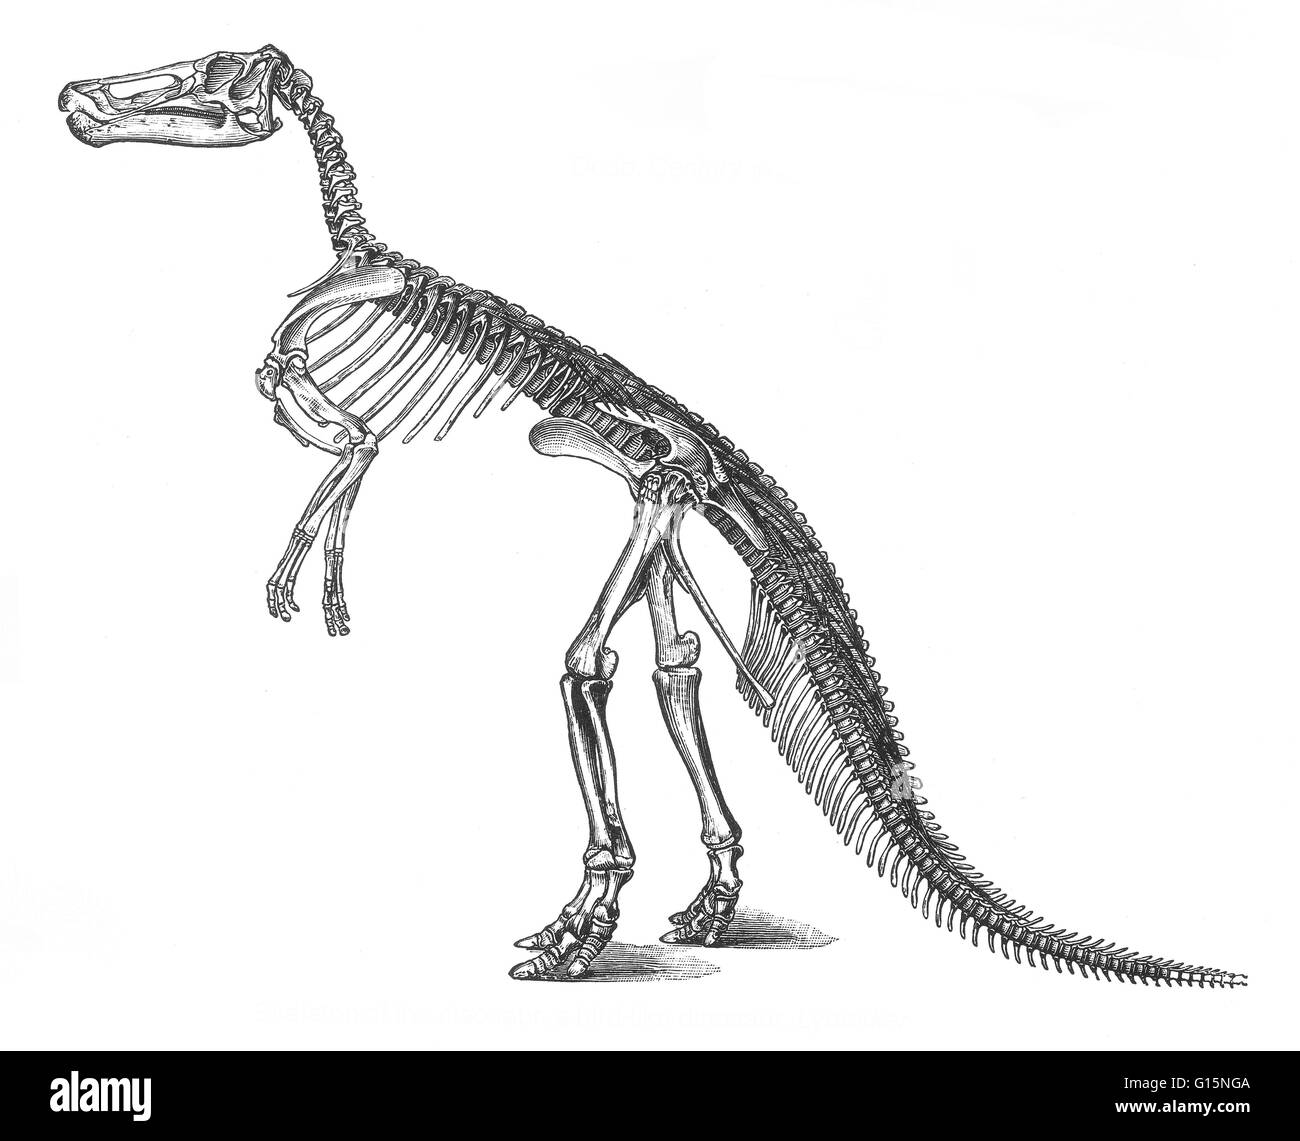 Claosaurus is a genus of primitive hadrosaurid (duck-billed dinosaur) that lived during the Late Cretaceous Period. It had a slender body and slim feet, with long legs, small arms, and a long, stiff tail. It probably grew to a length of about 12 to 16 fee Stock Photo